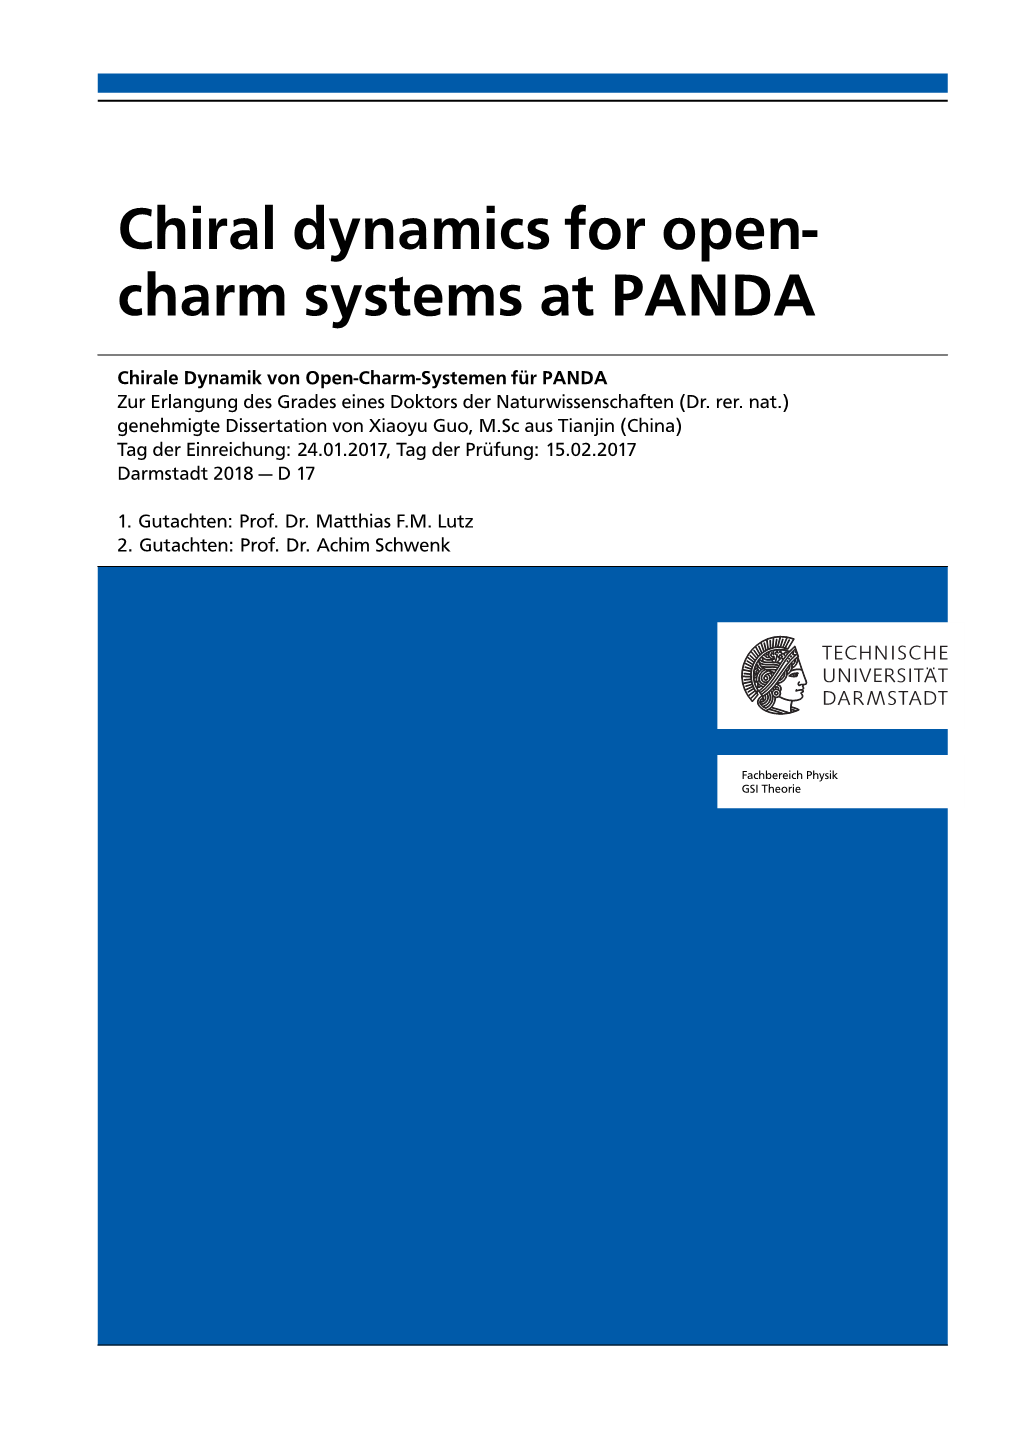 Chiral Dynamics for Open- Charm Systems at PANDA